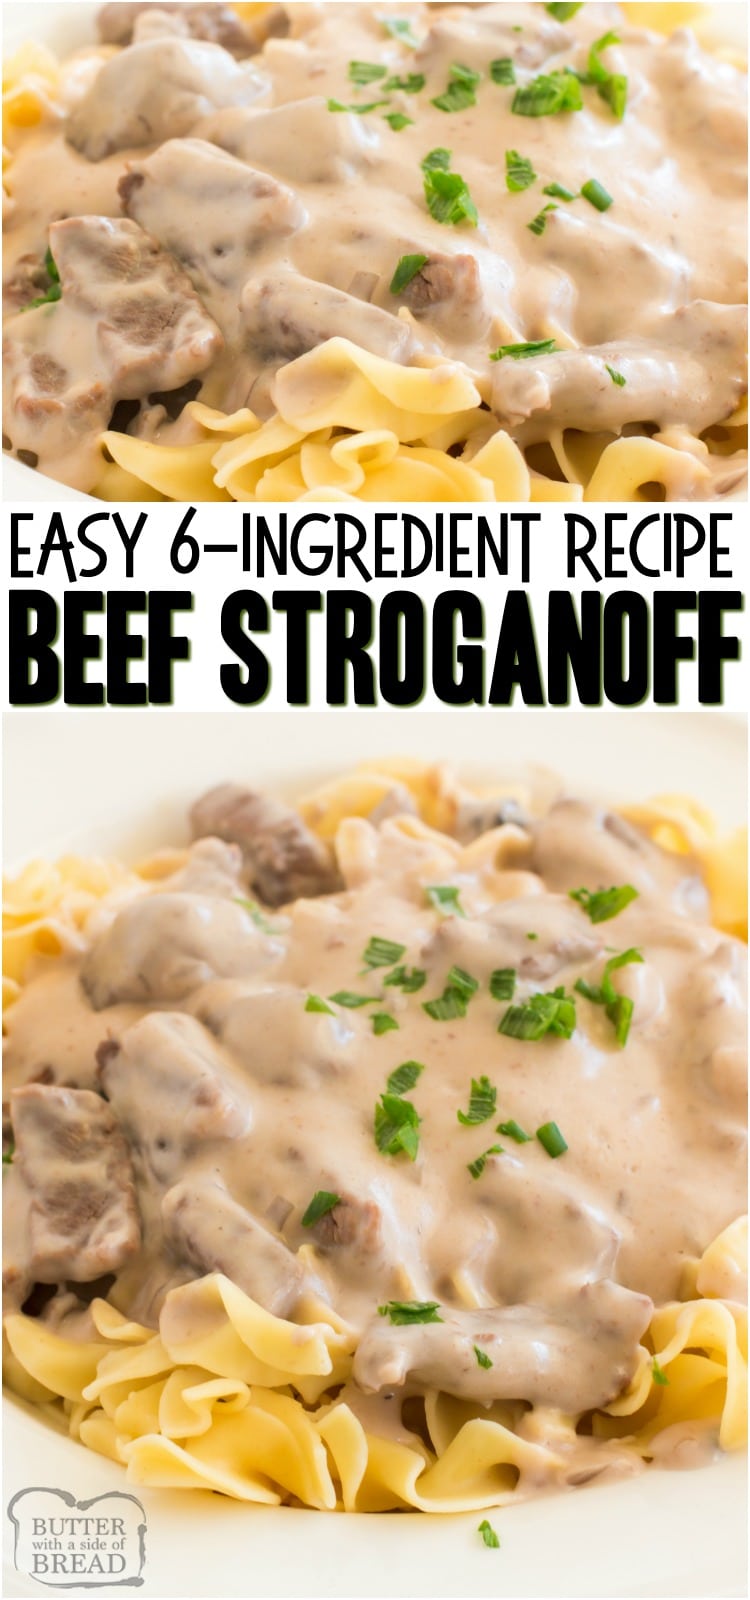 Easy Beef Stroganoff Recipe is a classic, creamy & delicious family dinner recipe.  With just a few simple ingredients, you too can make this mouth watering easy Beef Stroganoff dinner in no time at all. #dinner #easydinner #beef #stroganoff #pasta #recipe from BUTTER WITH A SIDE OF BREAD